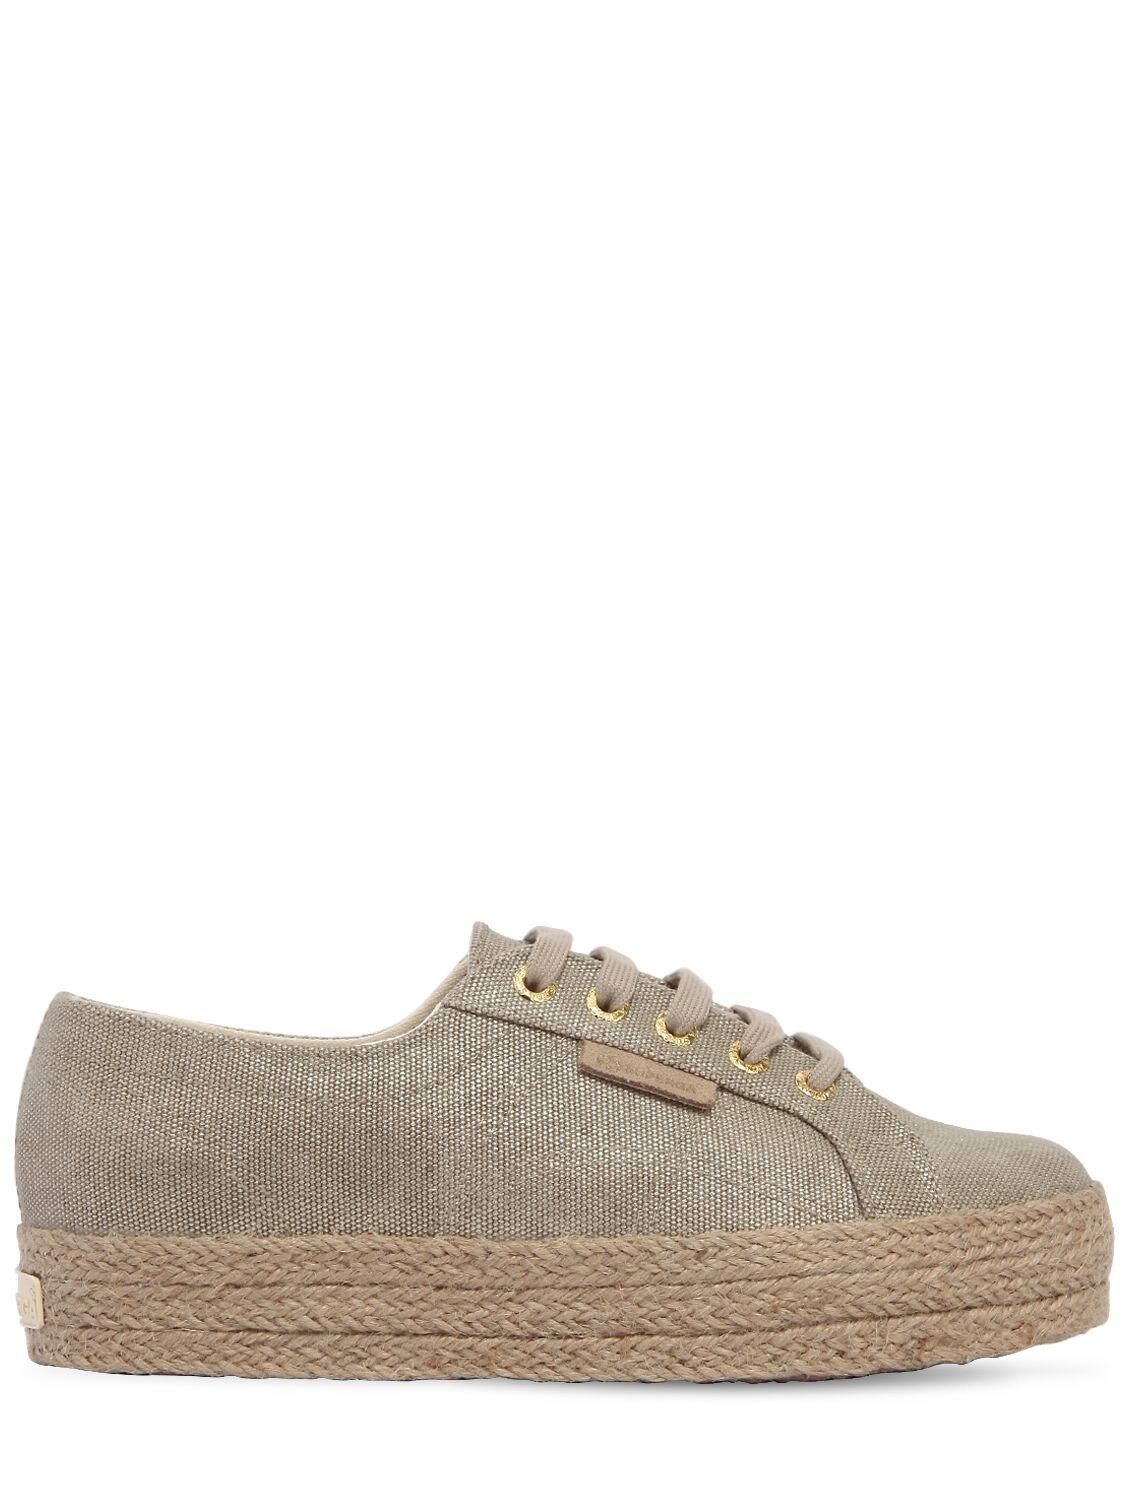 Superga 40mm Canvas Platform Sneakers In Sand